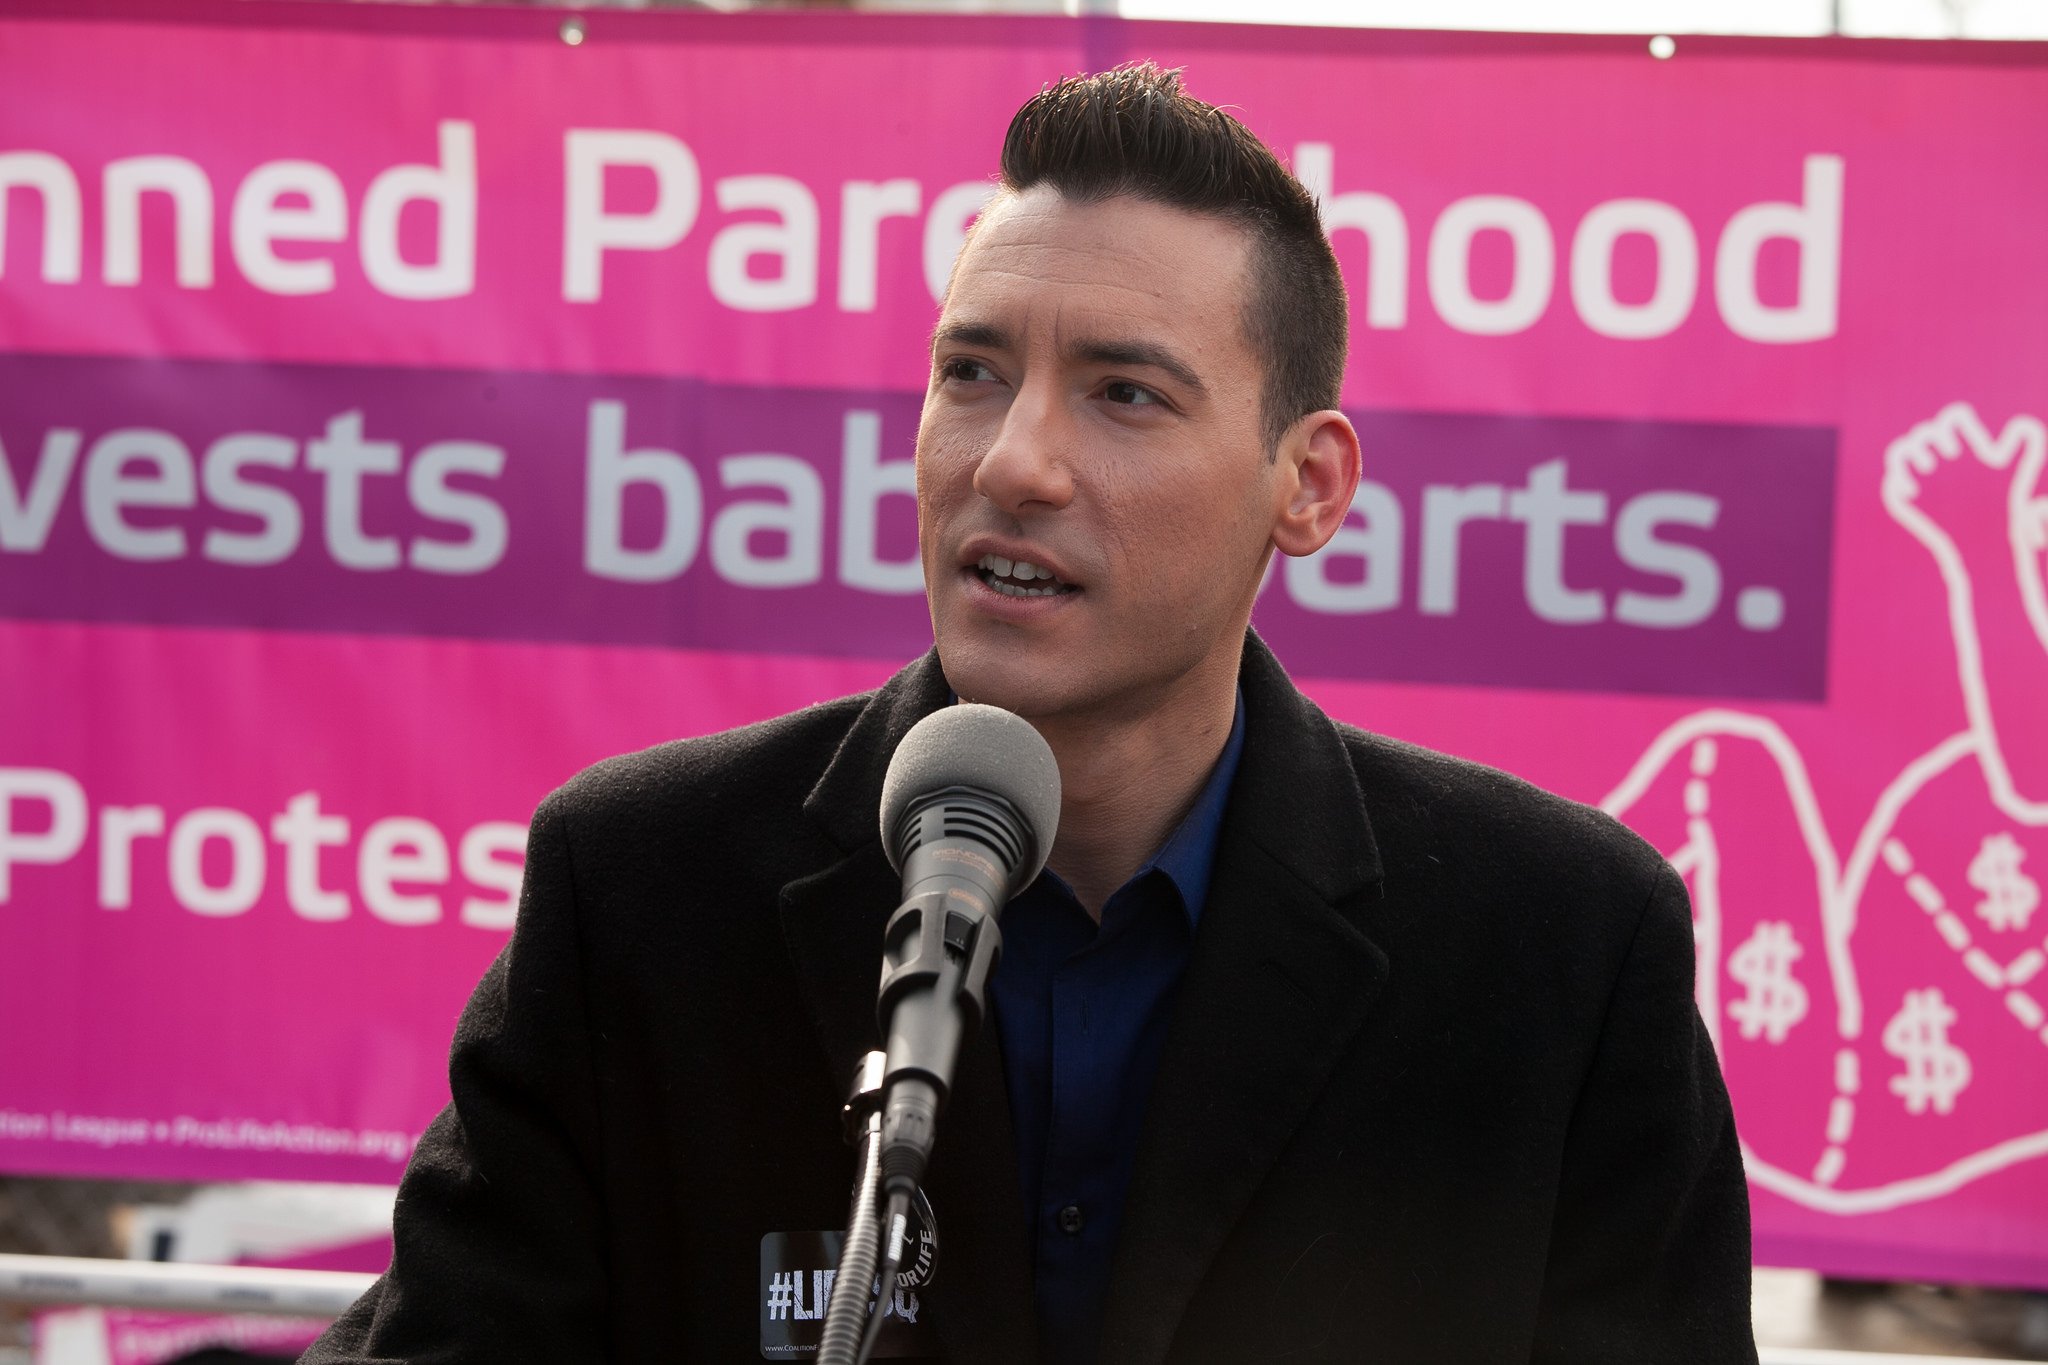 David Daleiden, who founded a fradulent biomedical company as part of an anti-abortion operation, is facing second-degree felony charges for tampering with a government record.